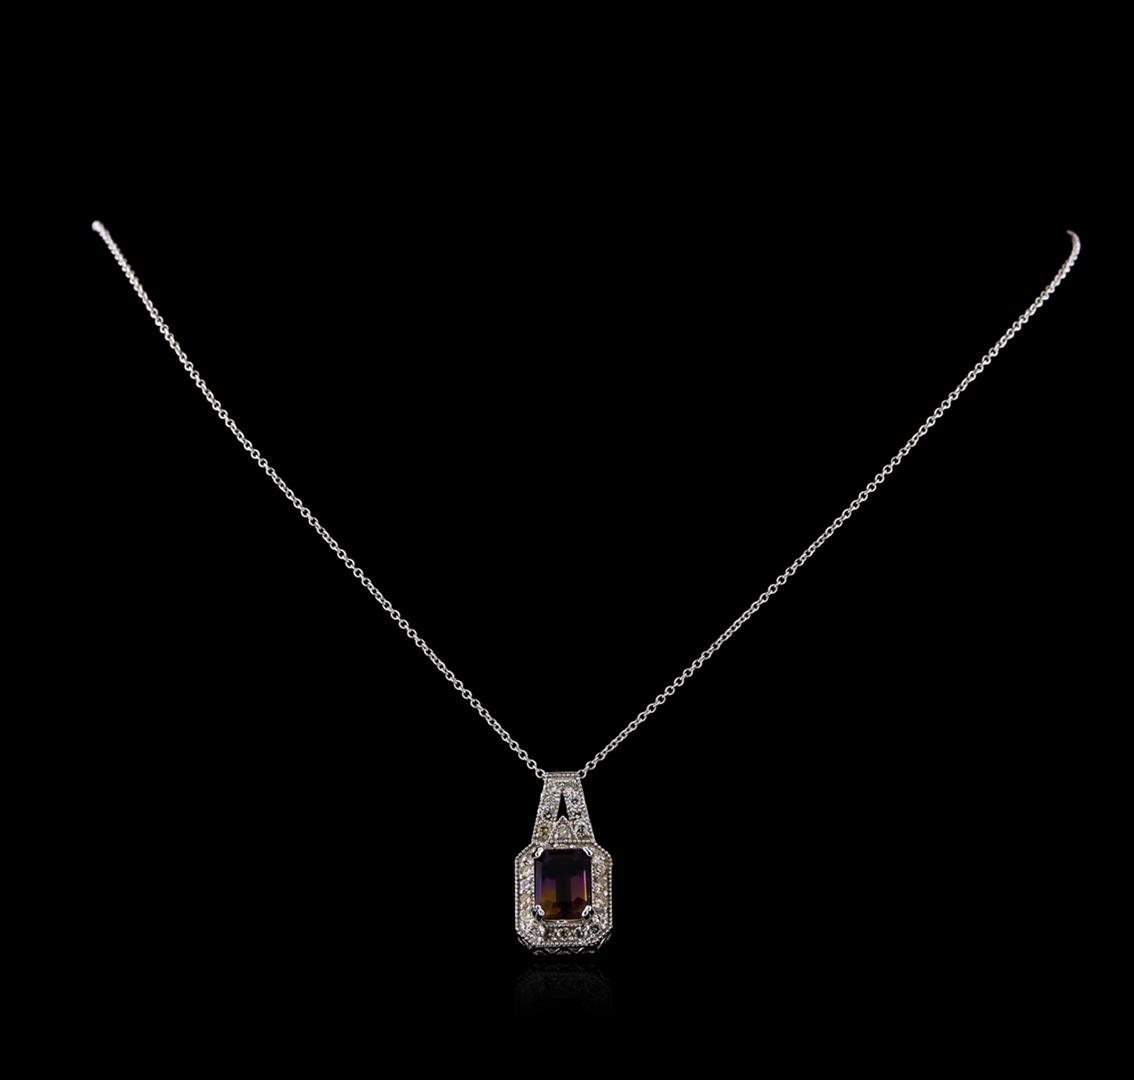 2.75 ctw Ametrine and Diamond Pendant With Chain - 14KT White Gold